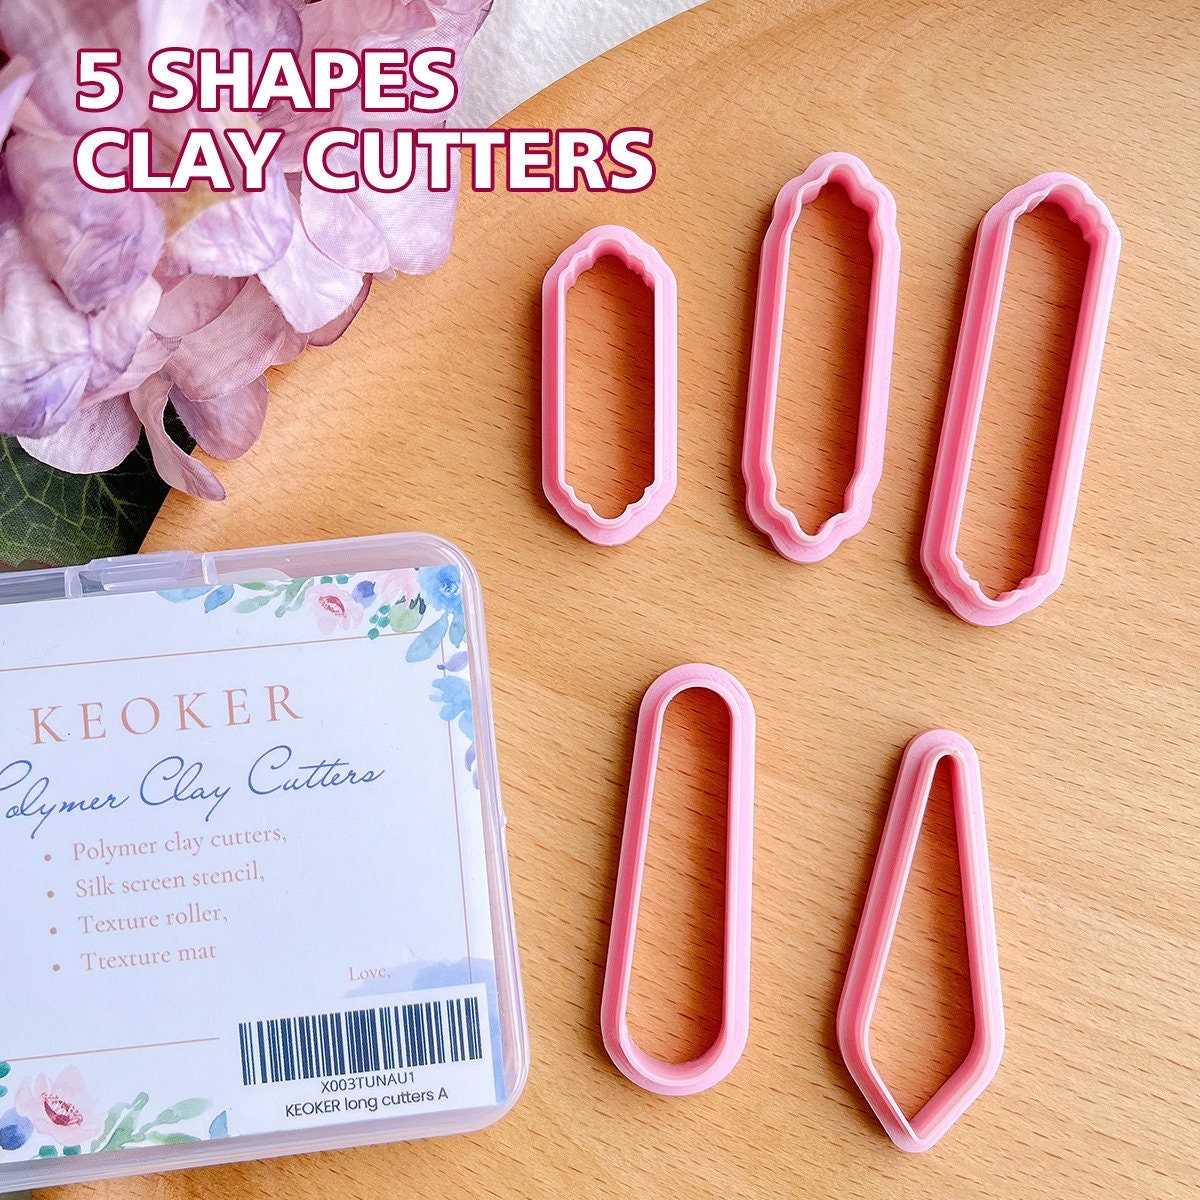 Keoker 15 Organic Shape Clay Cutters for Polymer Clay Jewelry